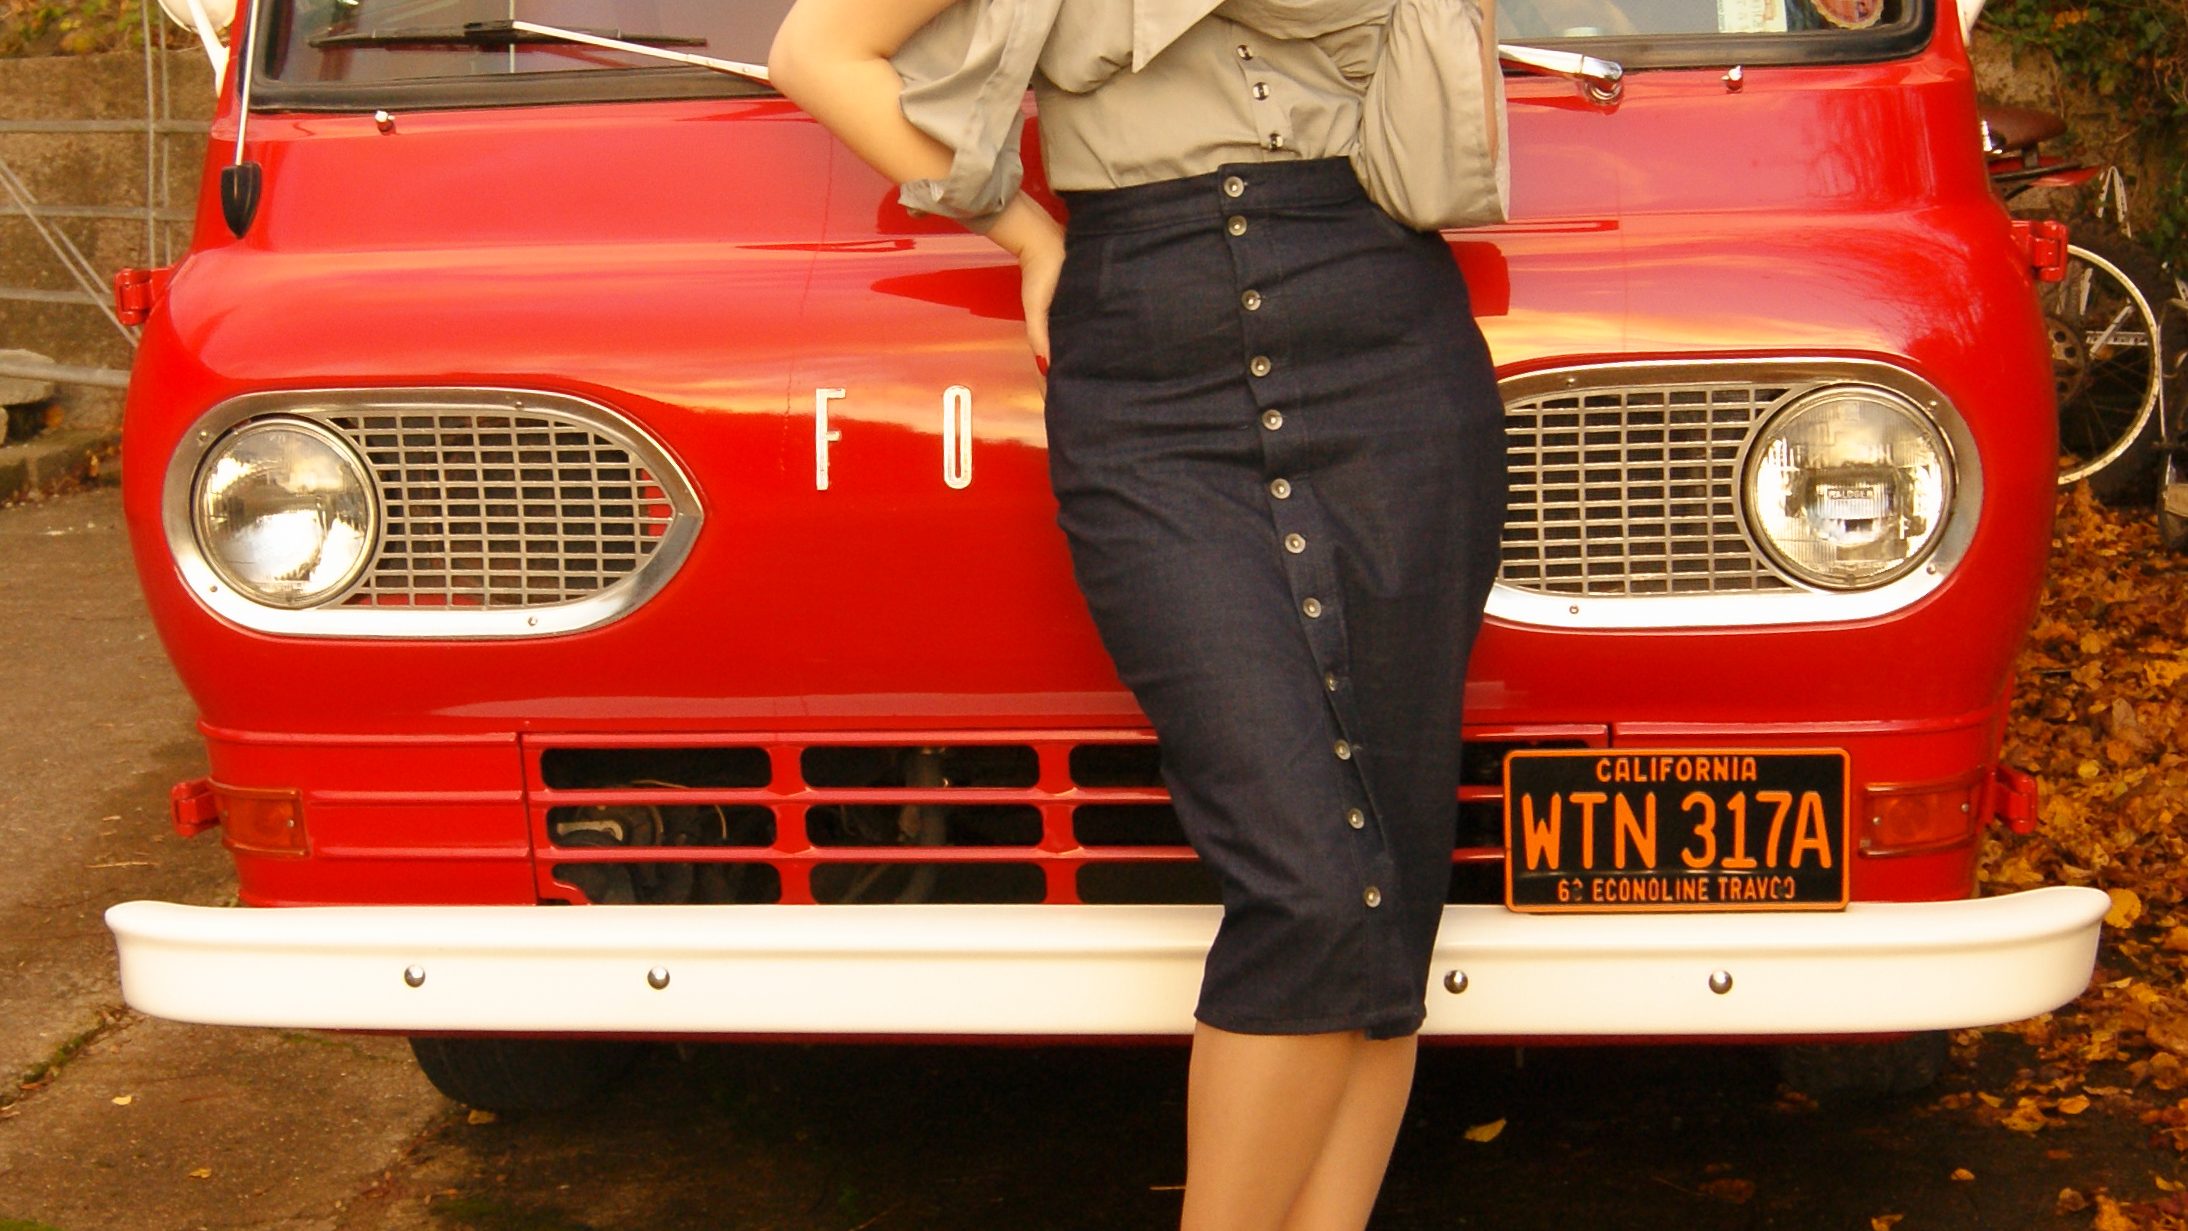 denim pencil skirt
Denim pencil skirt long
denim skirt mid length, denim skirt calf
Denim Skirts for Women Lady k loves, Rockabilly Clothing, shop retro clothing uk, 1950s clothing uk, pin up style clothing, shop ladies retro clothes, vintage pin up clothing UK, pin up style fashion, 50s clothing, pin up clothing, vintage style clothing, Buy Pin Up Clothing, rockabilly style, rockabilly fashion, Retro UK Clothing, Vintage Clothinf, unique vintage, rockabilly women's clothing, vintage punk clothing, ladies punk clothing, pin up punk clothing, shop vintage, vintage inspired sustainable womens, , pencil skirt 50s’ style, Vintage skirt, vintage retro skirt, wiggle pencil skirt, pencil skirt cotton, pencil skirt 1950s, a line vintage skirt, black 50s skirt, pencil skirt rockabilly, 50s’ skirt, vintage skirt, blouse and skirt, vintage western skirt, vintage pencil skirts, ladykloves, pencil skirts with pockets, rockabilly pencil skirt outfit